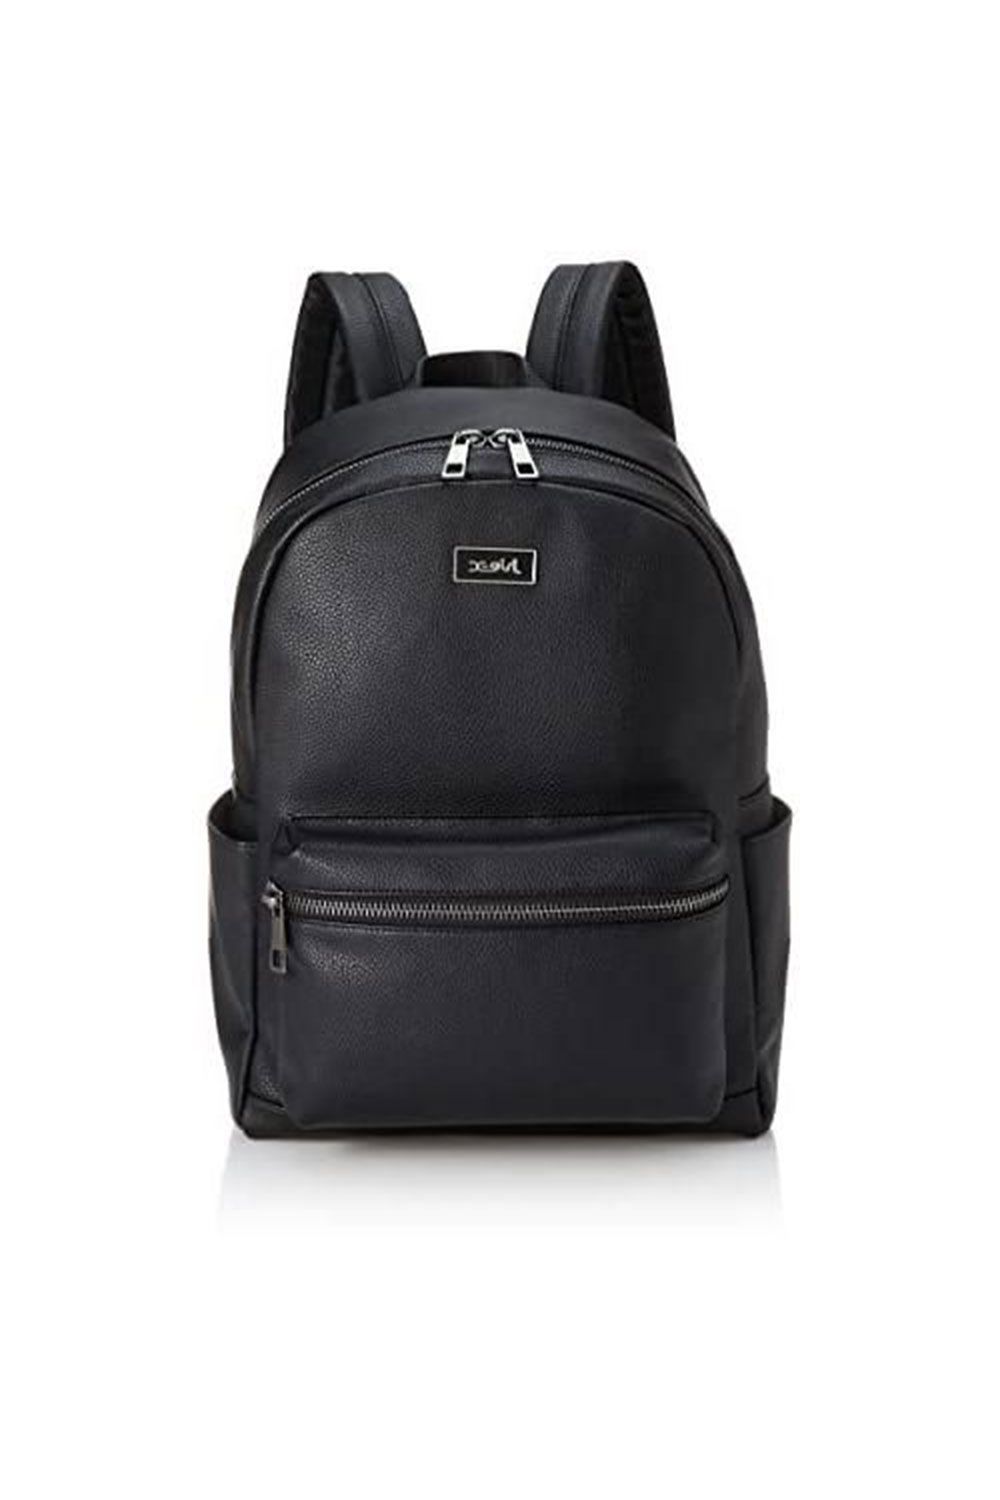 X-girl - 【人気リピート商品】 FAUX LEATHER BACKPACK / ブラック | Tempt